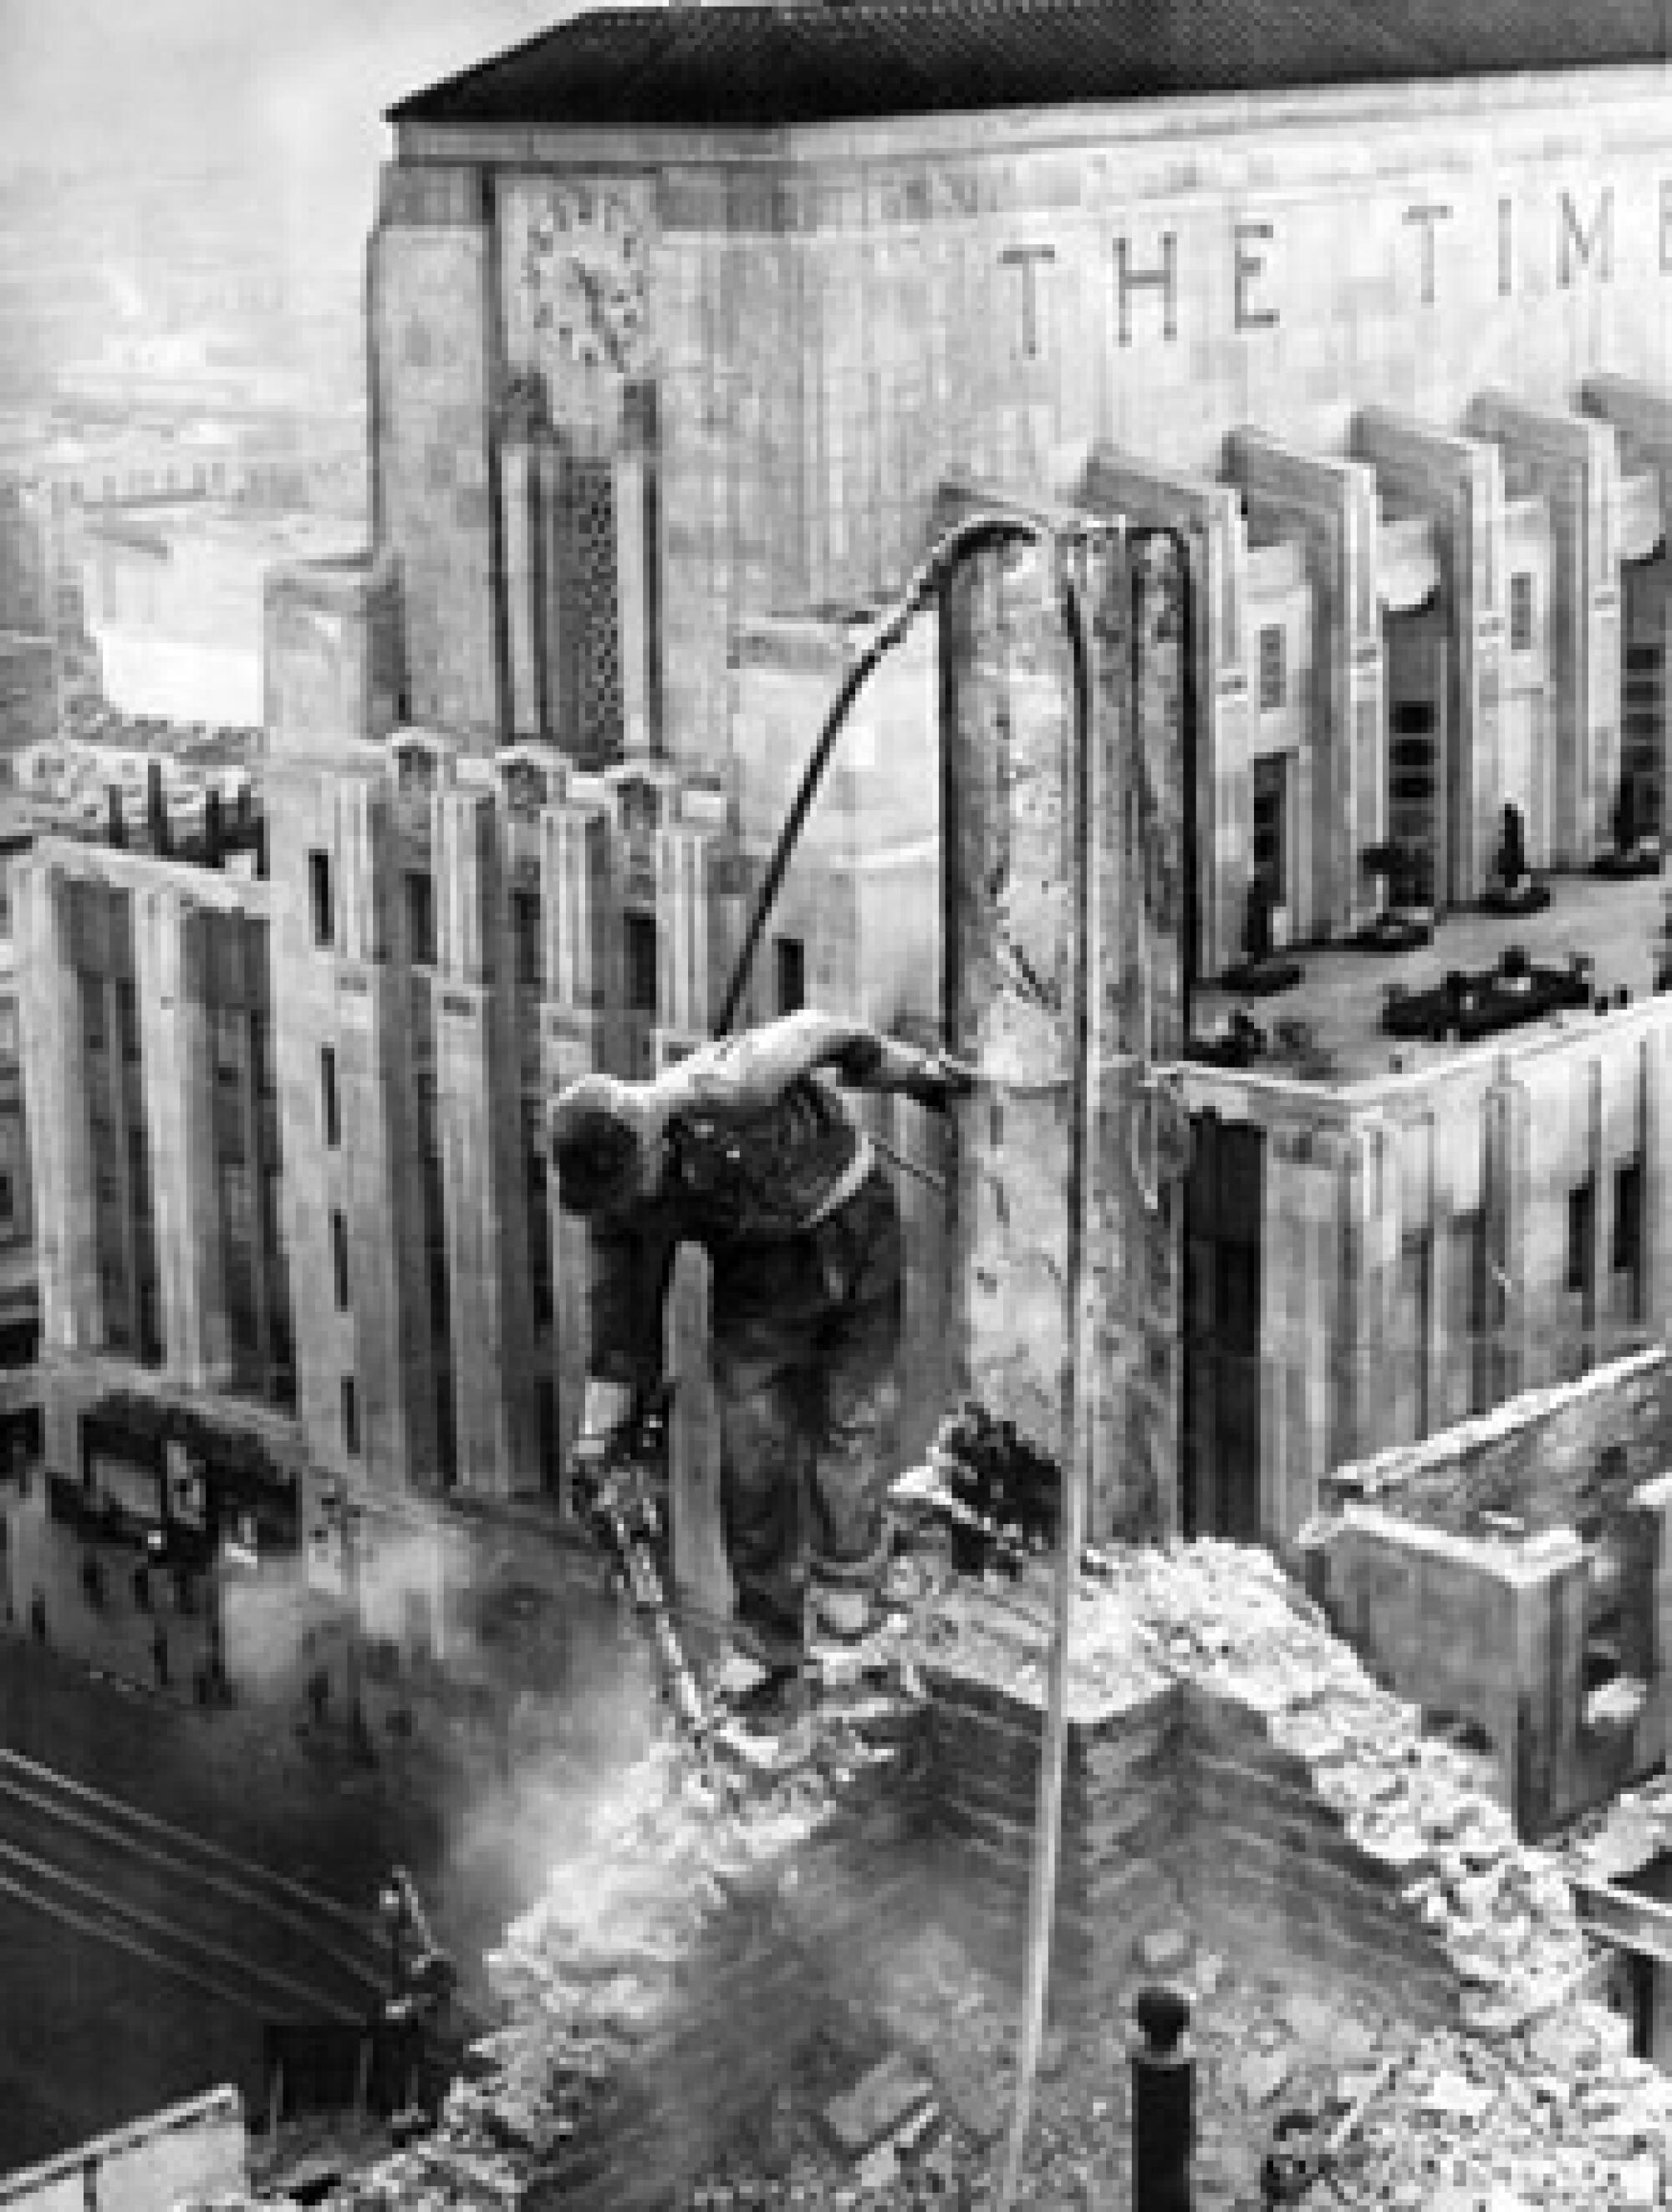 A black-and-white photo of a worker jackhammering on top of a building's remains, a stately Art Deco building behind him.